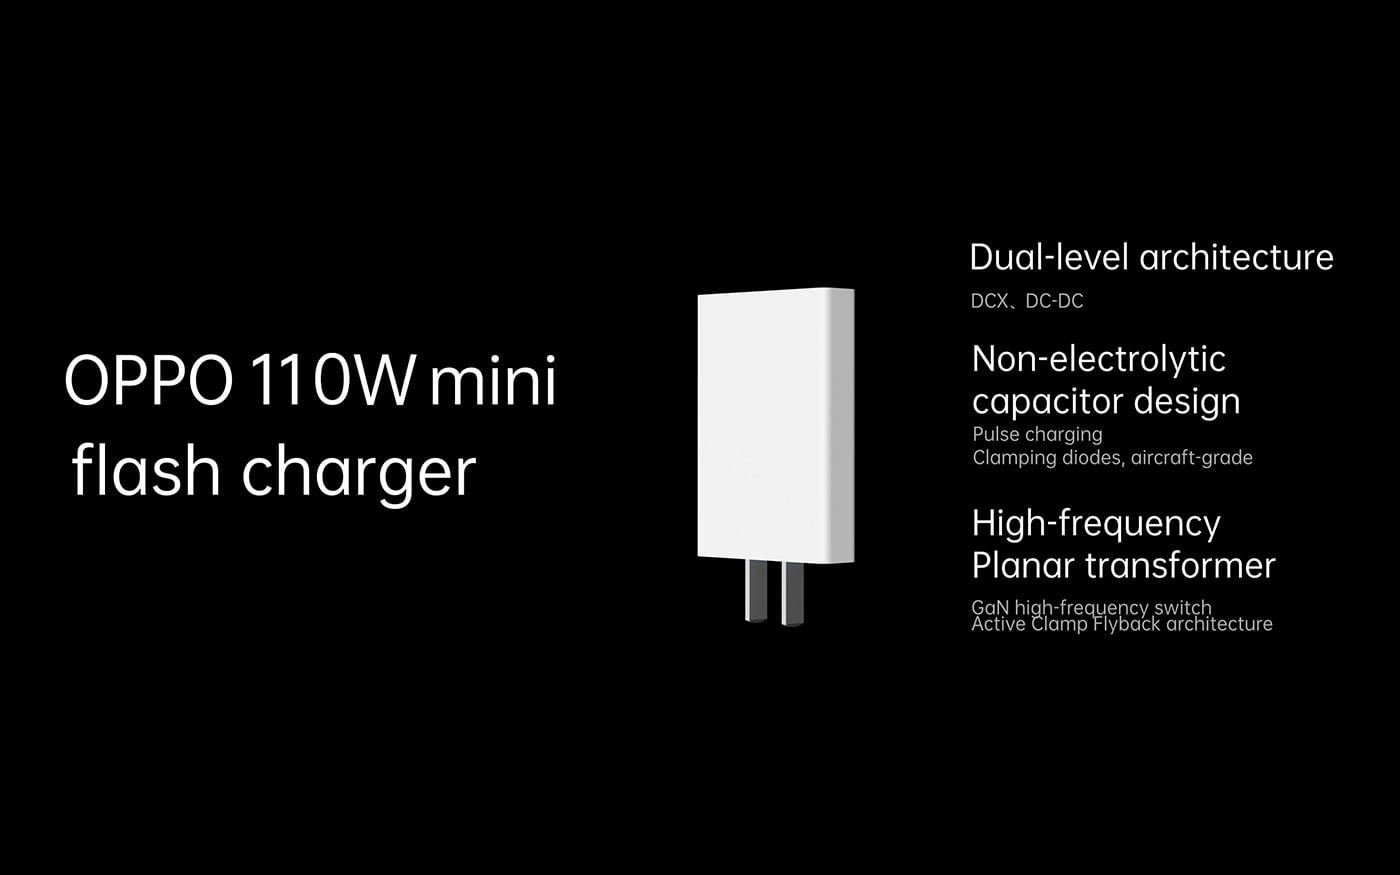 Oppo 110W mini Flash Charger